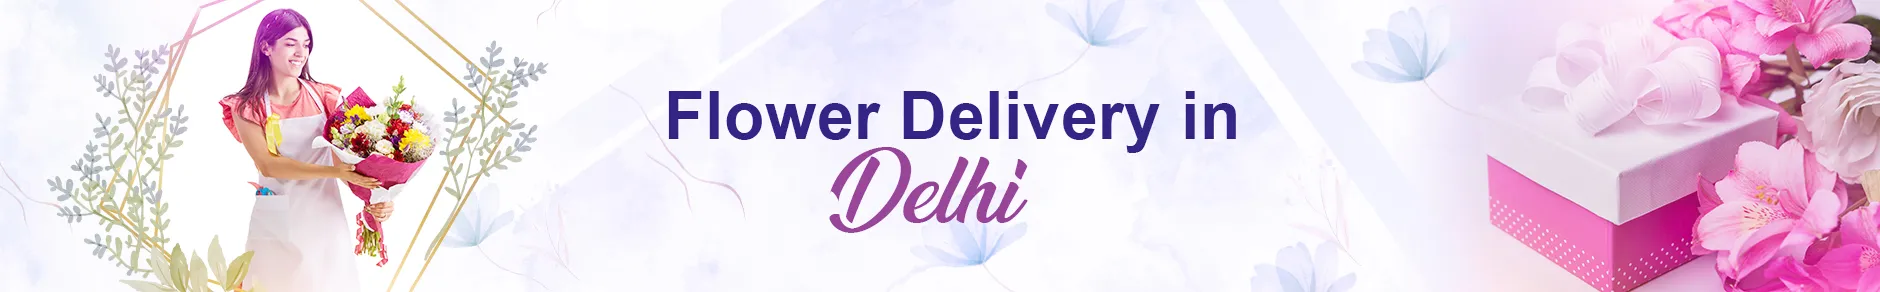 Flower Delivery in Delhi | Send Flowers to Delhi in 2 hours | Free Delivery